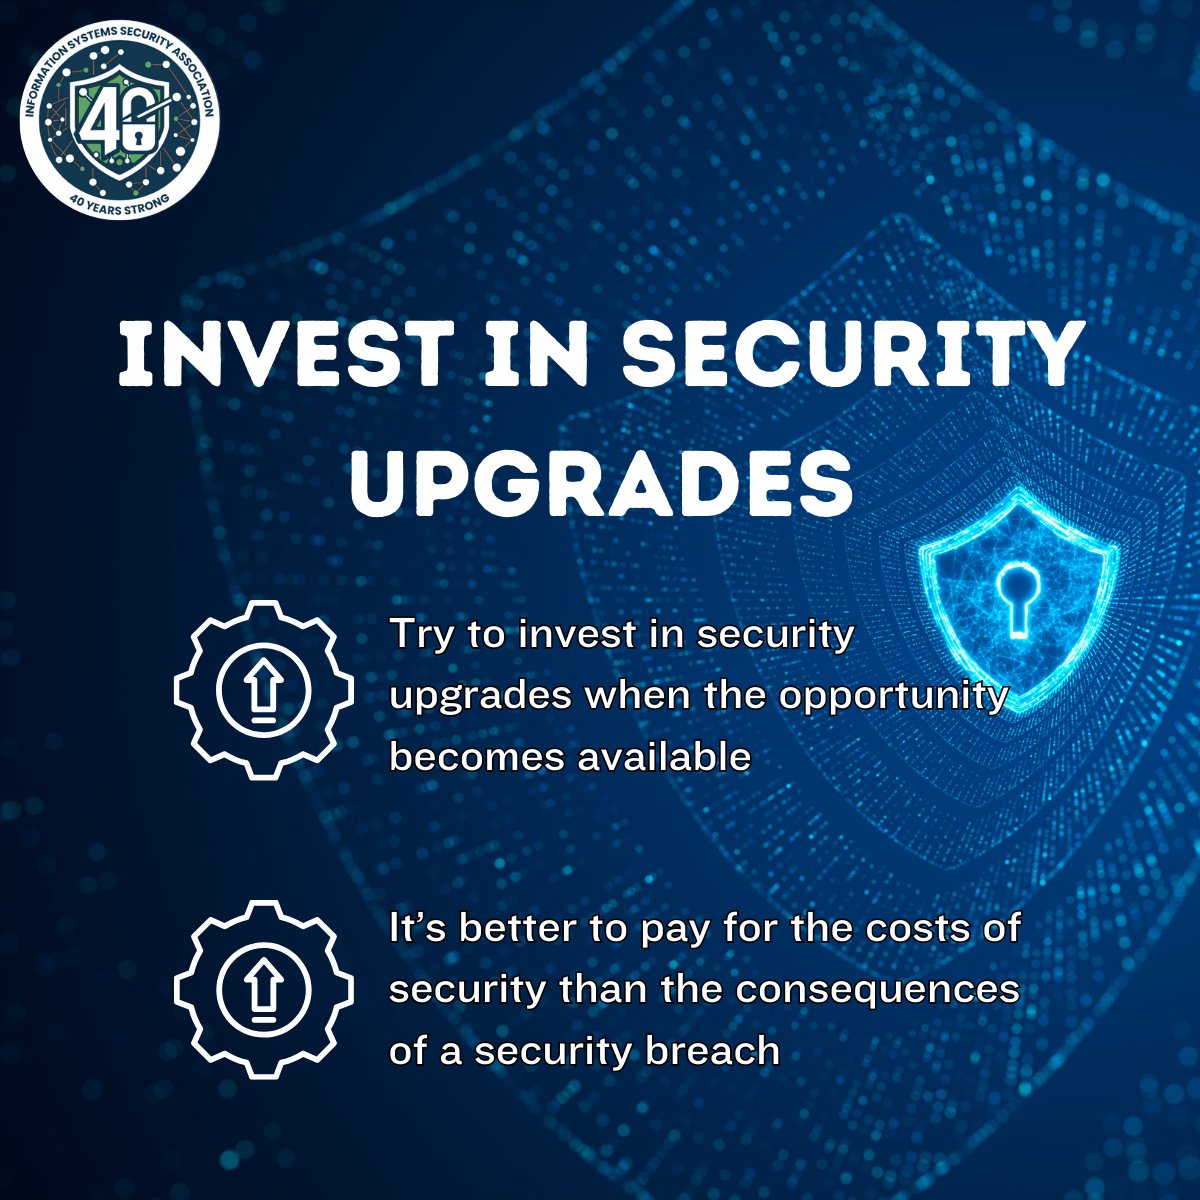 Prioritize security upgrades! Investing in #security now saves you from costly breaches later. It's wiser to pay for security measures upfront than deal with the aftermath of a breach. Protect your assets and reputation!

#TipsandTricks #ISSA #Infosec #ISSA40YearsStrong